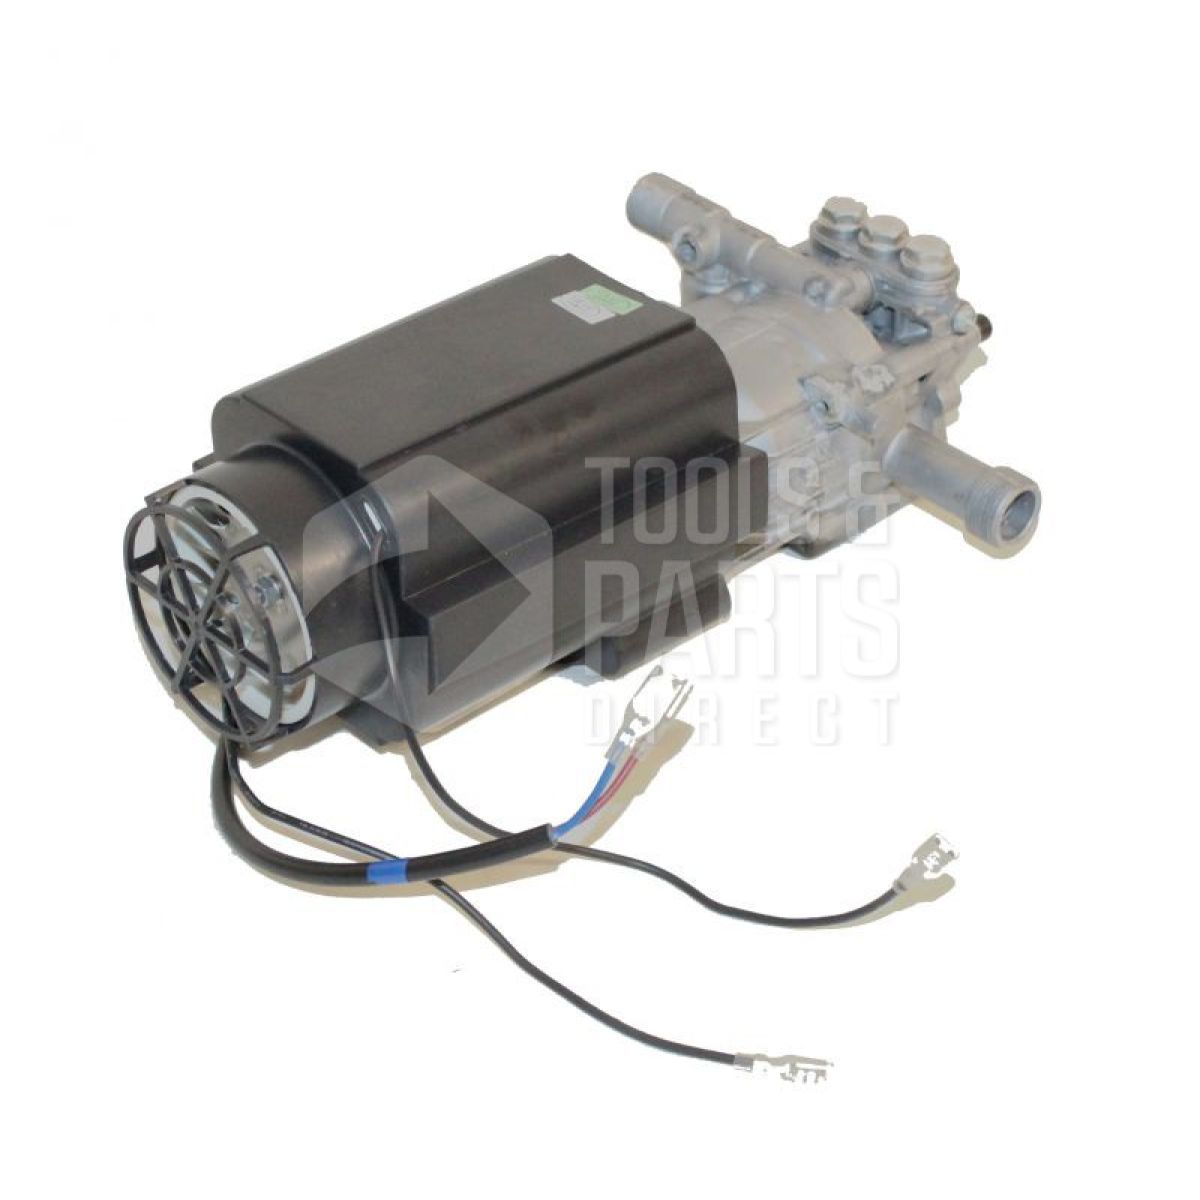 Black & Decker Pw1700spm Pressure Washer (type 1) Spare Parts  SPARE_PW1700SPM/TYPE_1 from Spare Parts World